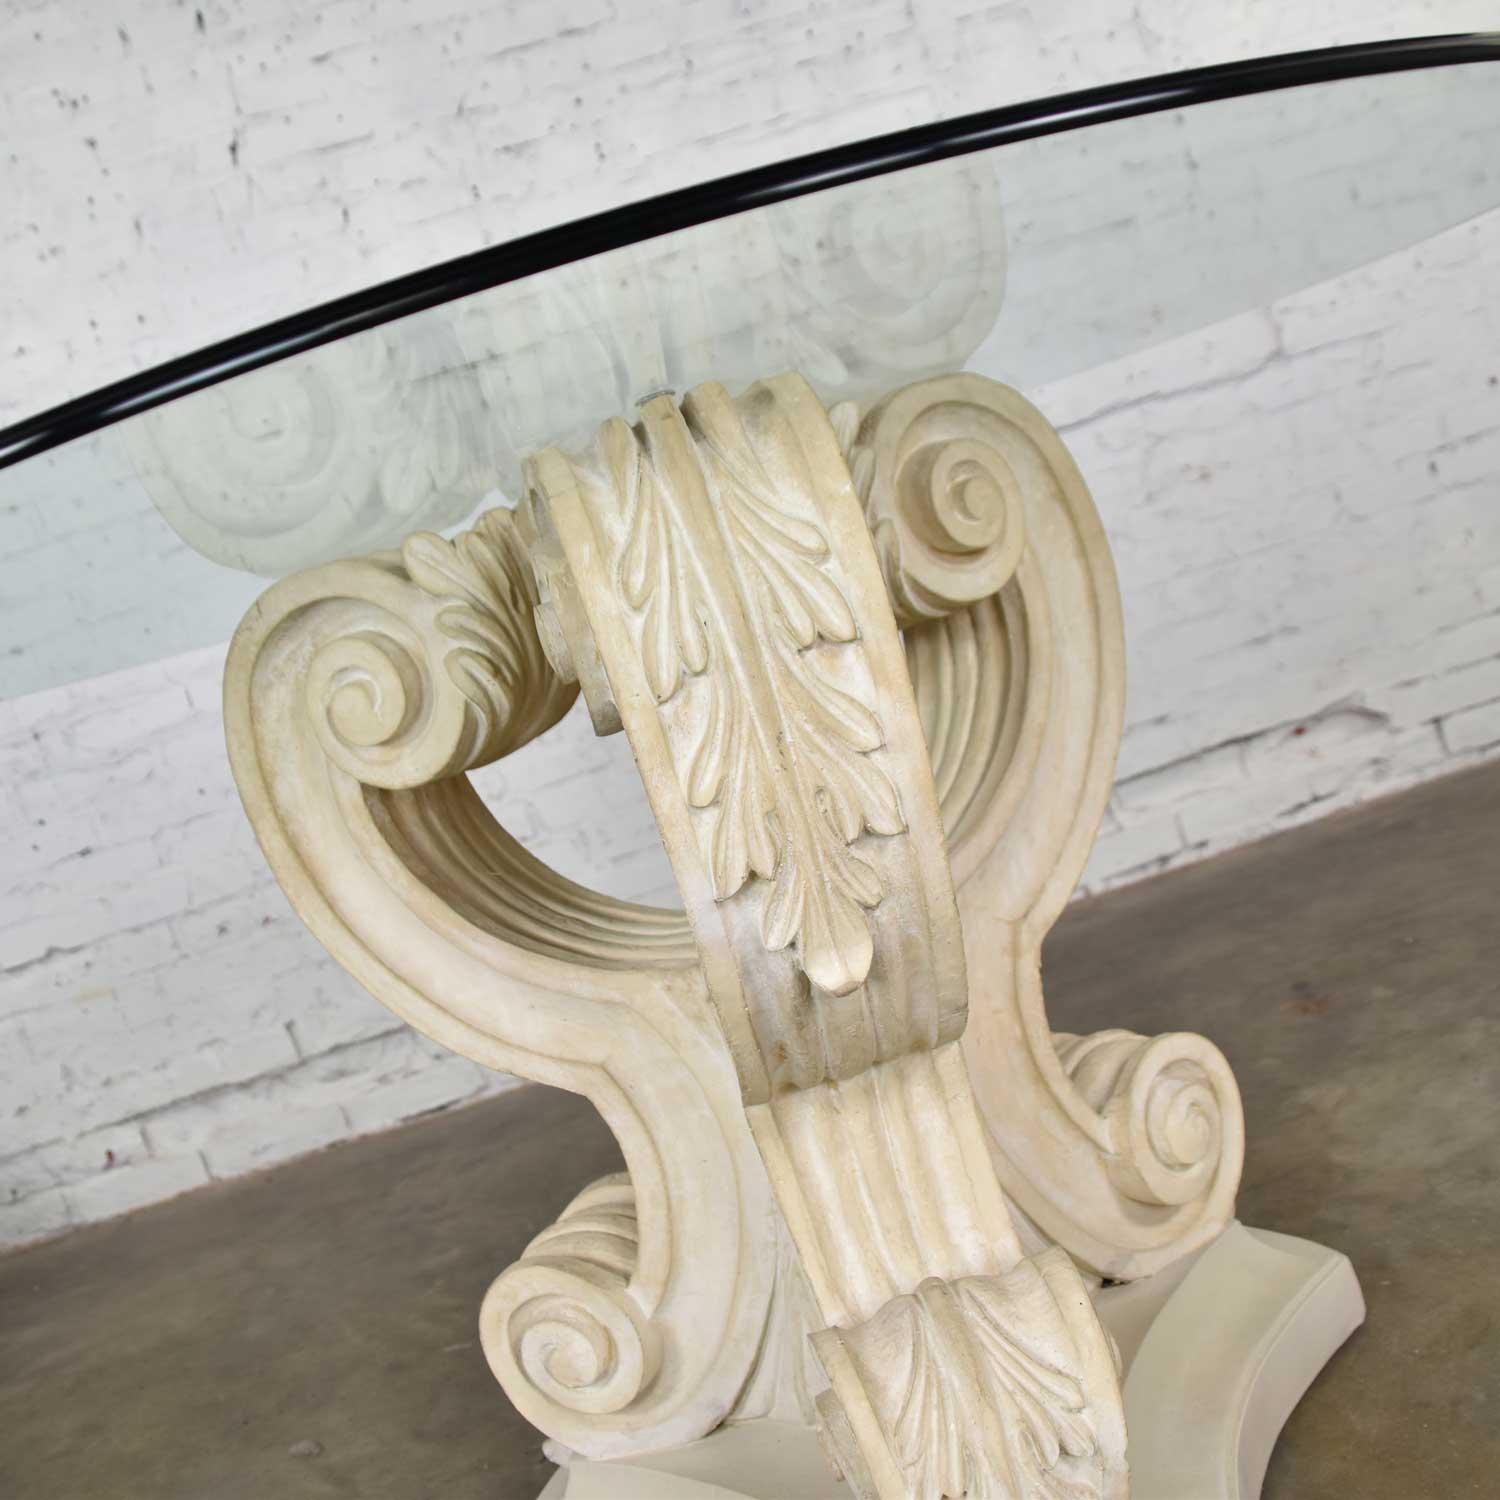 20th Century Neoclassical Architectural Plaster Pedestal Dining or Center Table Round Glass